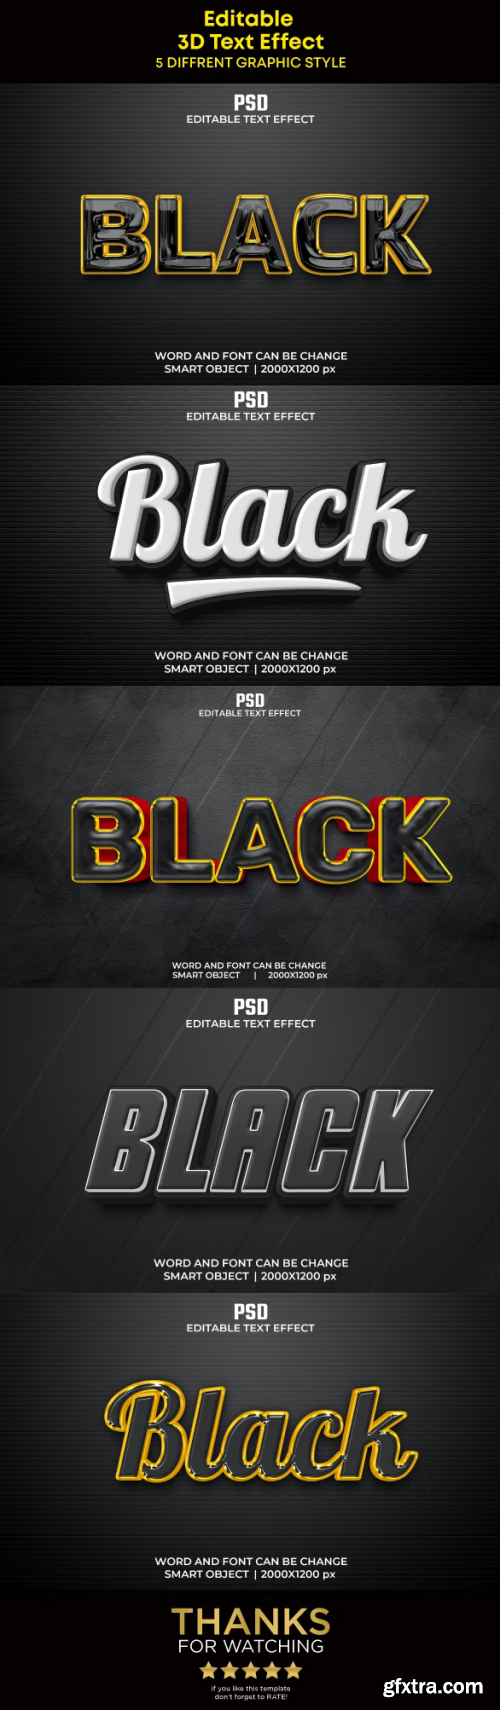 GraphicRiver - 5 Black 3D Editable Text Effects Pack 37083488